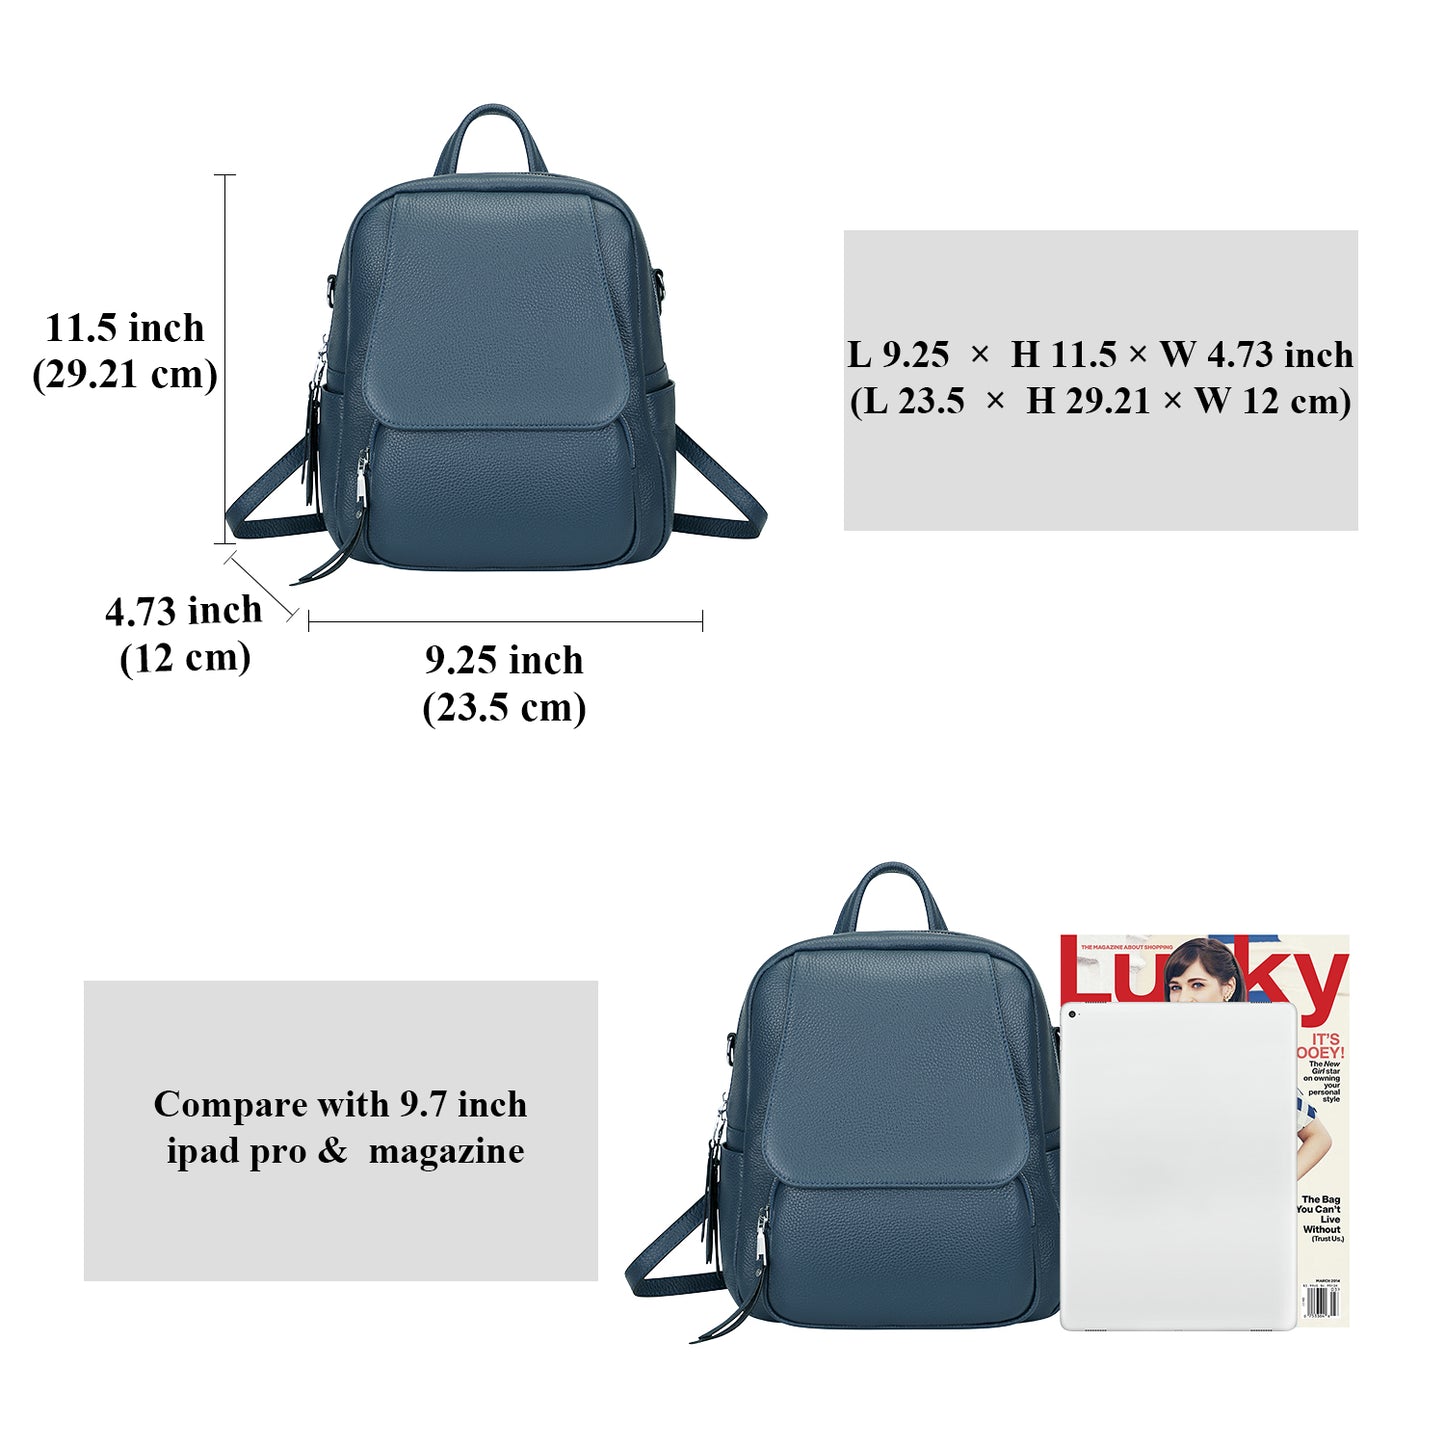 ALTOSY Small Genuine Leather Backpack